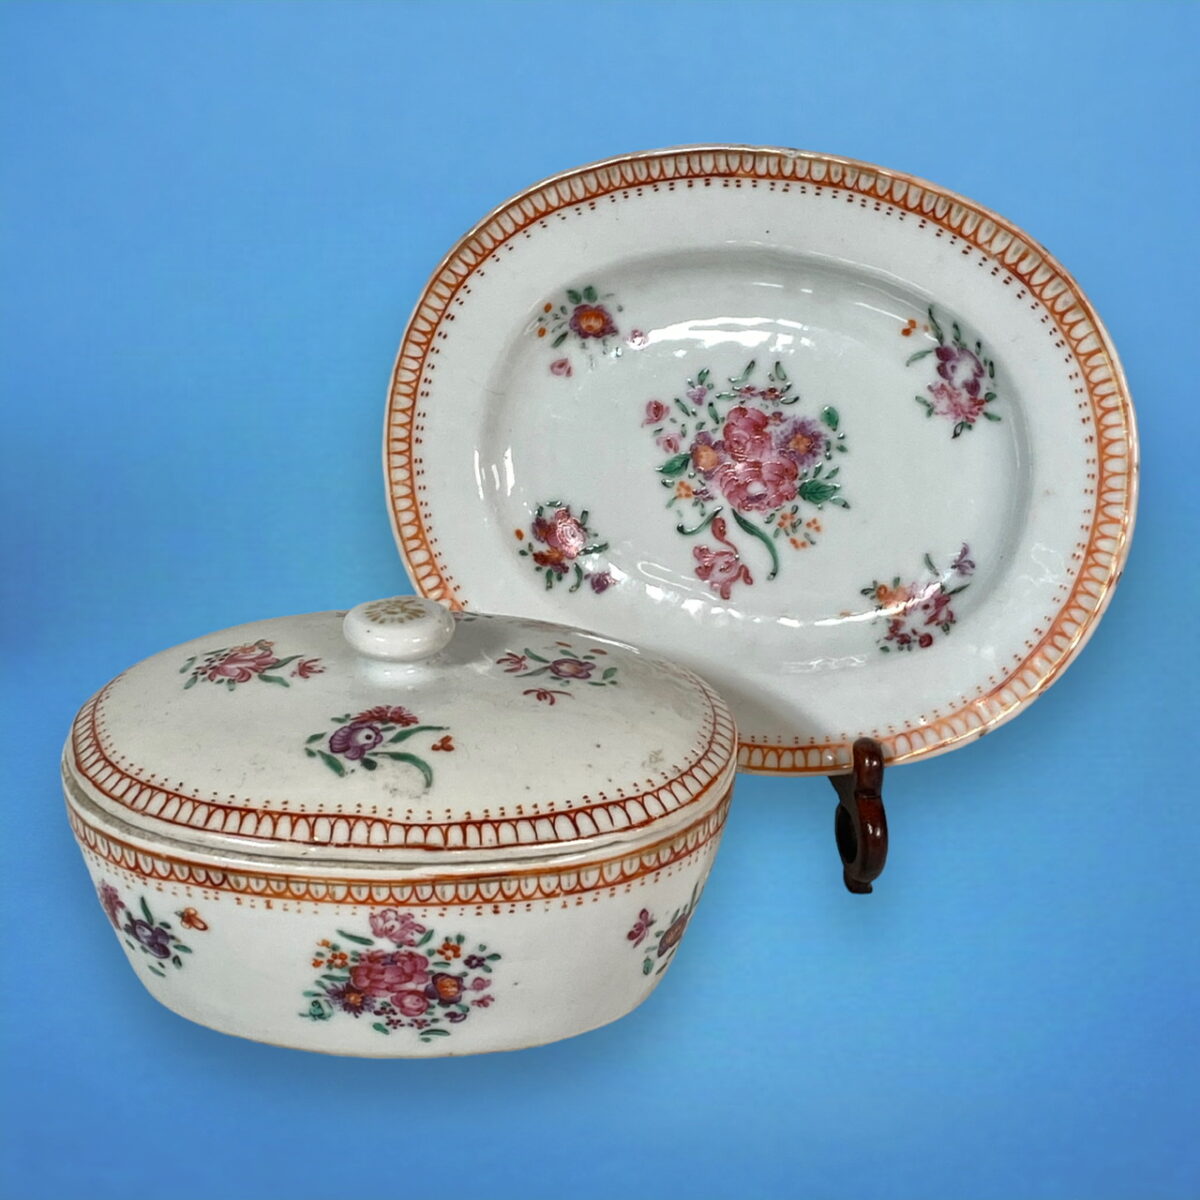 C18th Chinese Export Porcelain Butter Dish & Stand